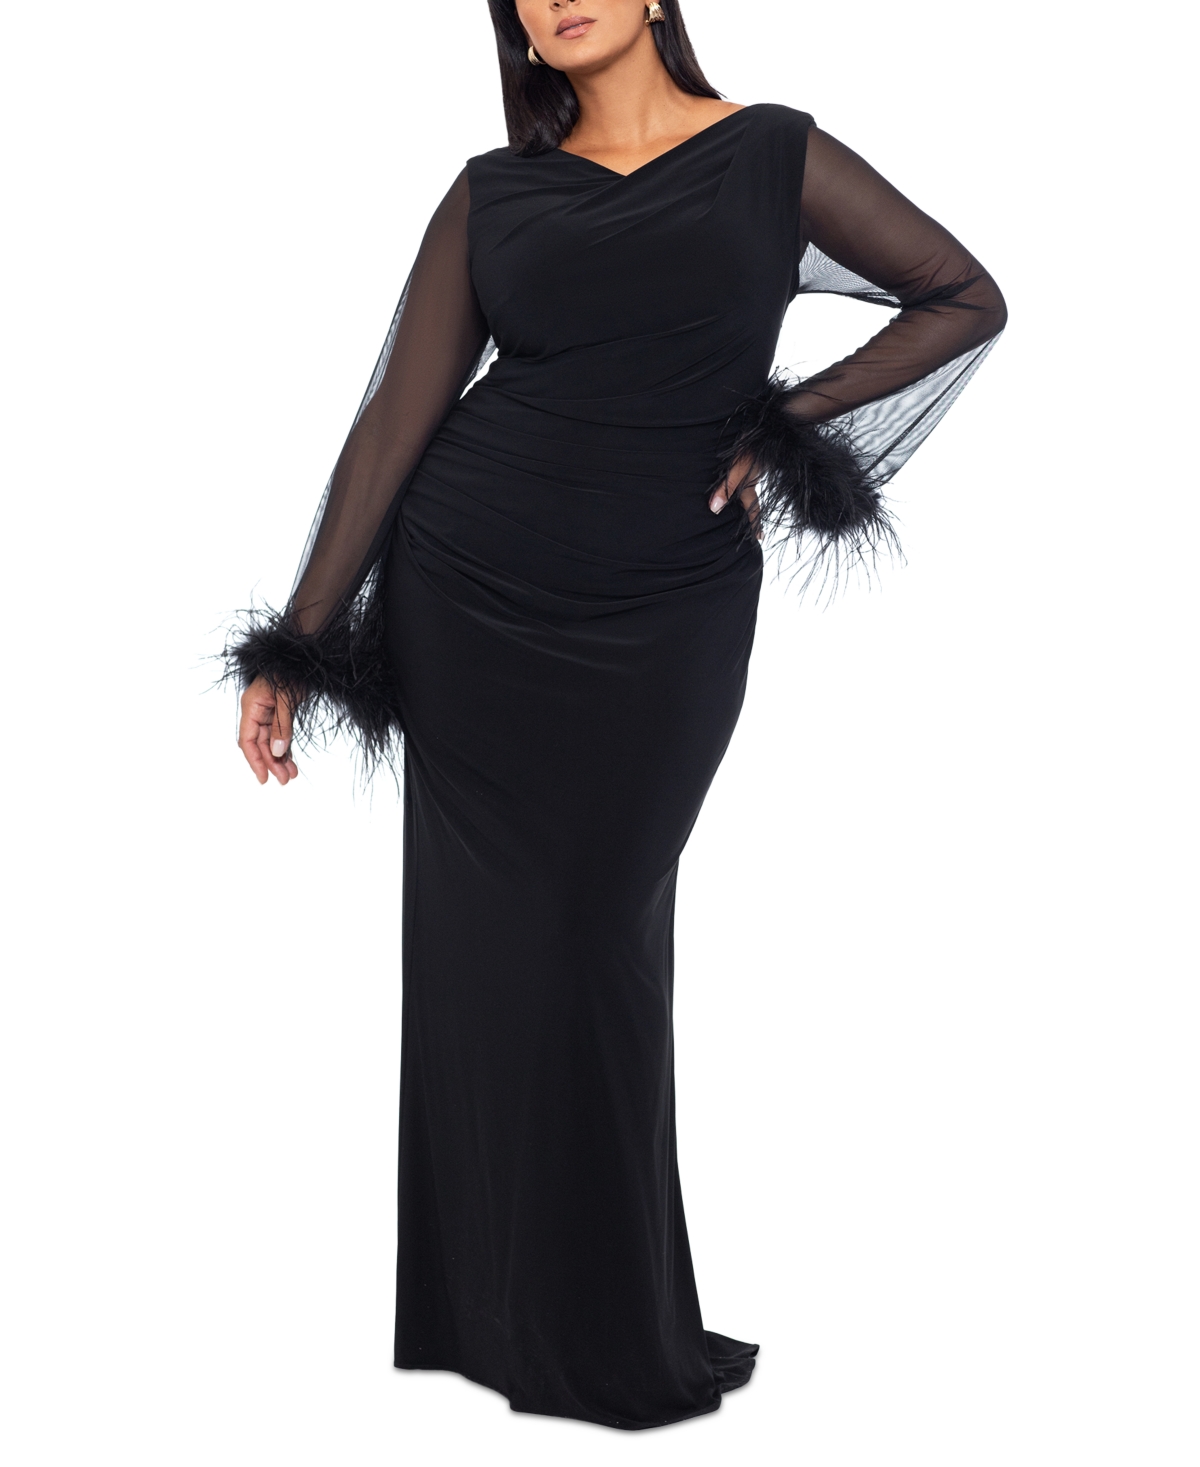 70s Plus Size Costumes, Clothing, Outfits | Hippie, Disco Betsy  Adam Plus Size Feather-Cuff Sheath Gown - Black $299.00 AT vintagedancer.com